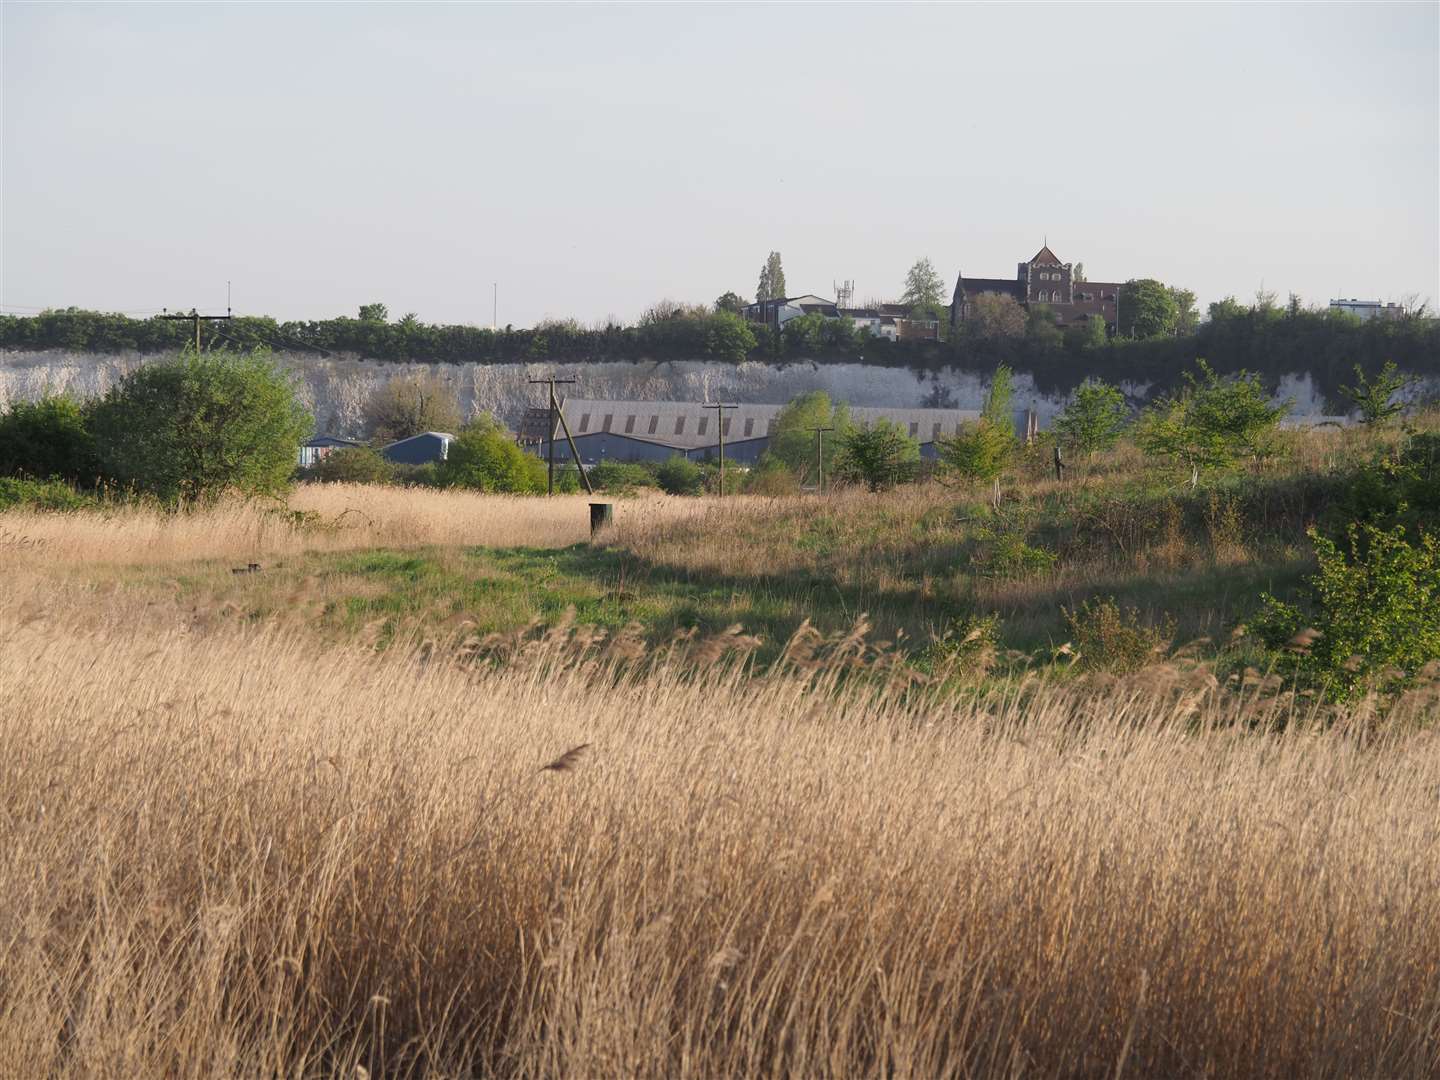 The Swanscombe marshes have been designated a special site of scientific interest. Photo: Barry Wright